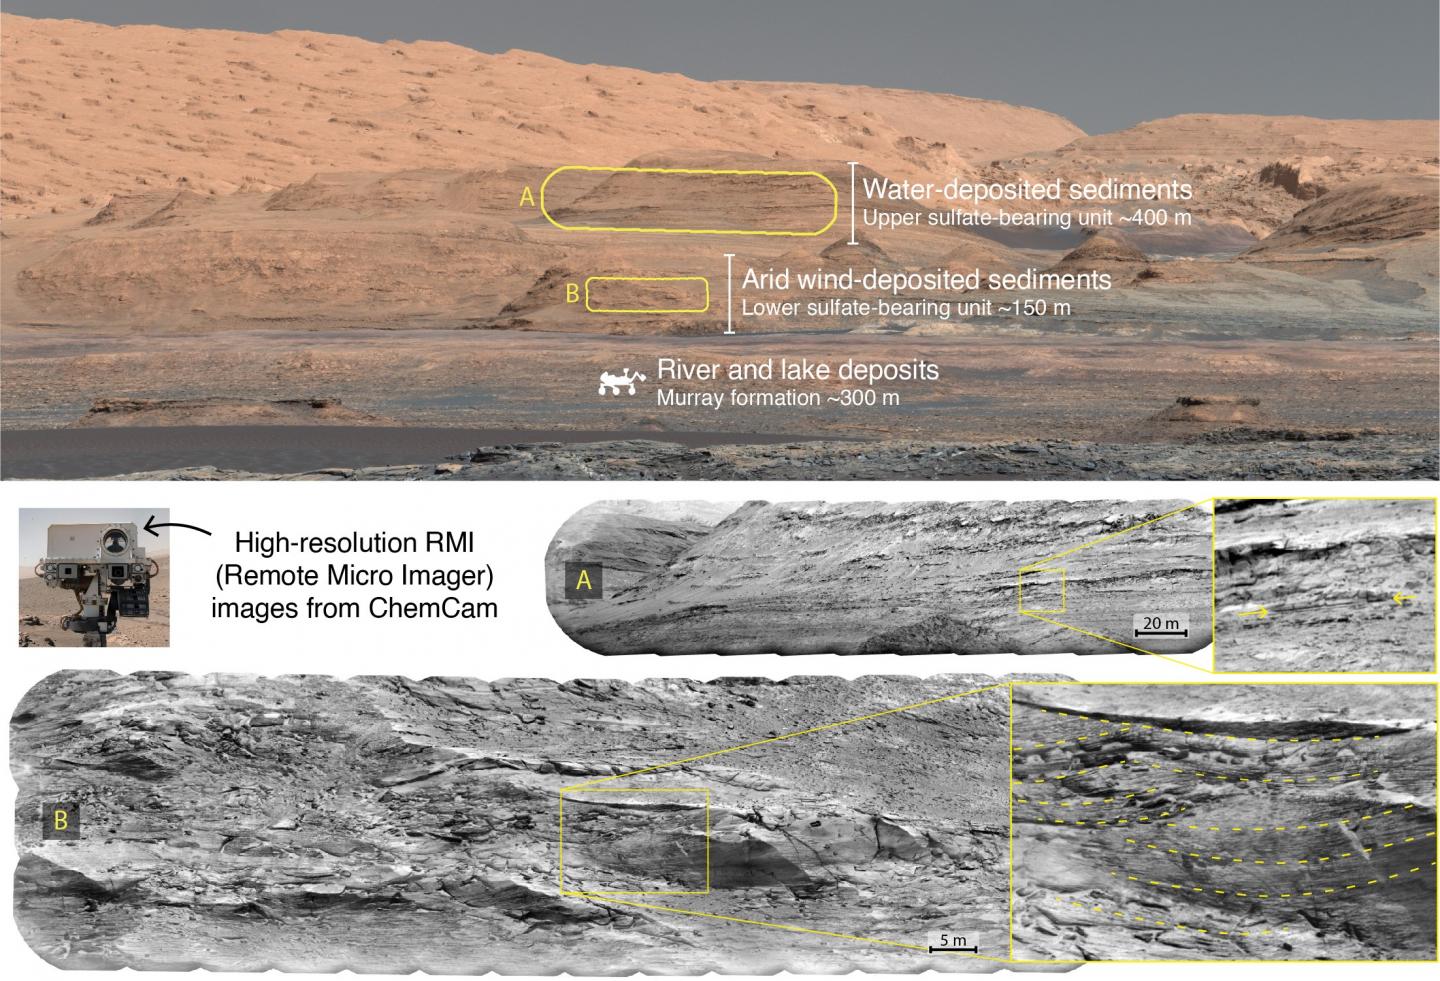 View of hillocks on the slopes of Mount Sharp, showing the various types of terrain